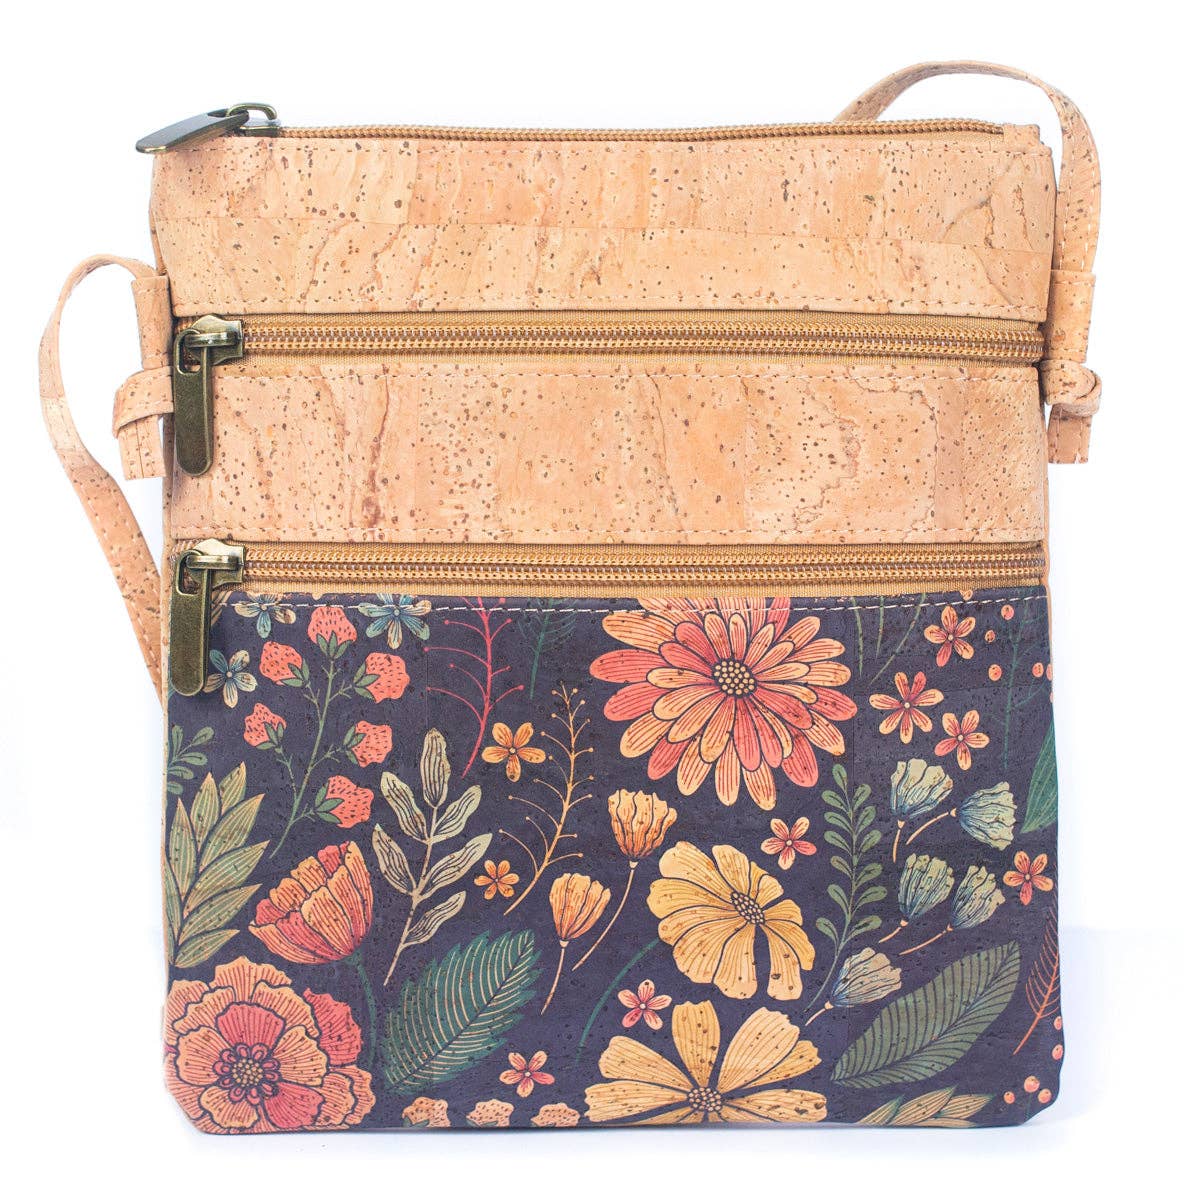 Angelco Accessories - Triple section crossbody bag - black floral, front view on white background